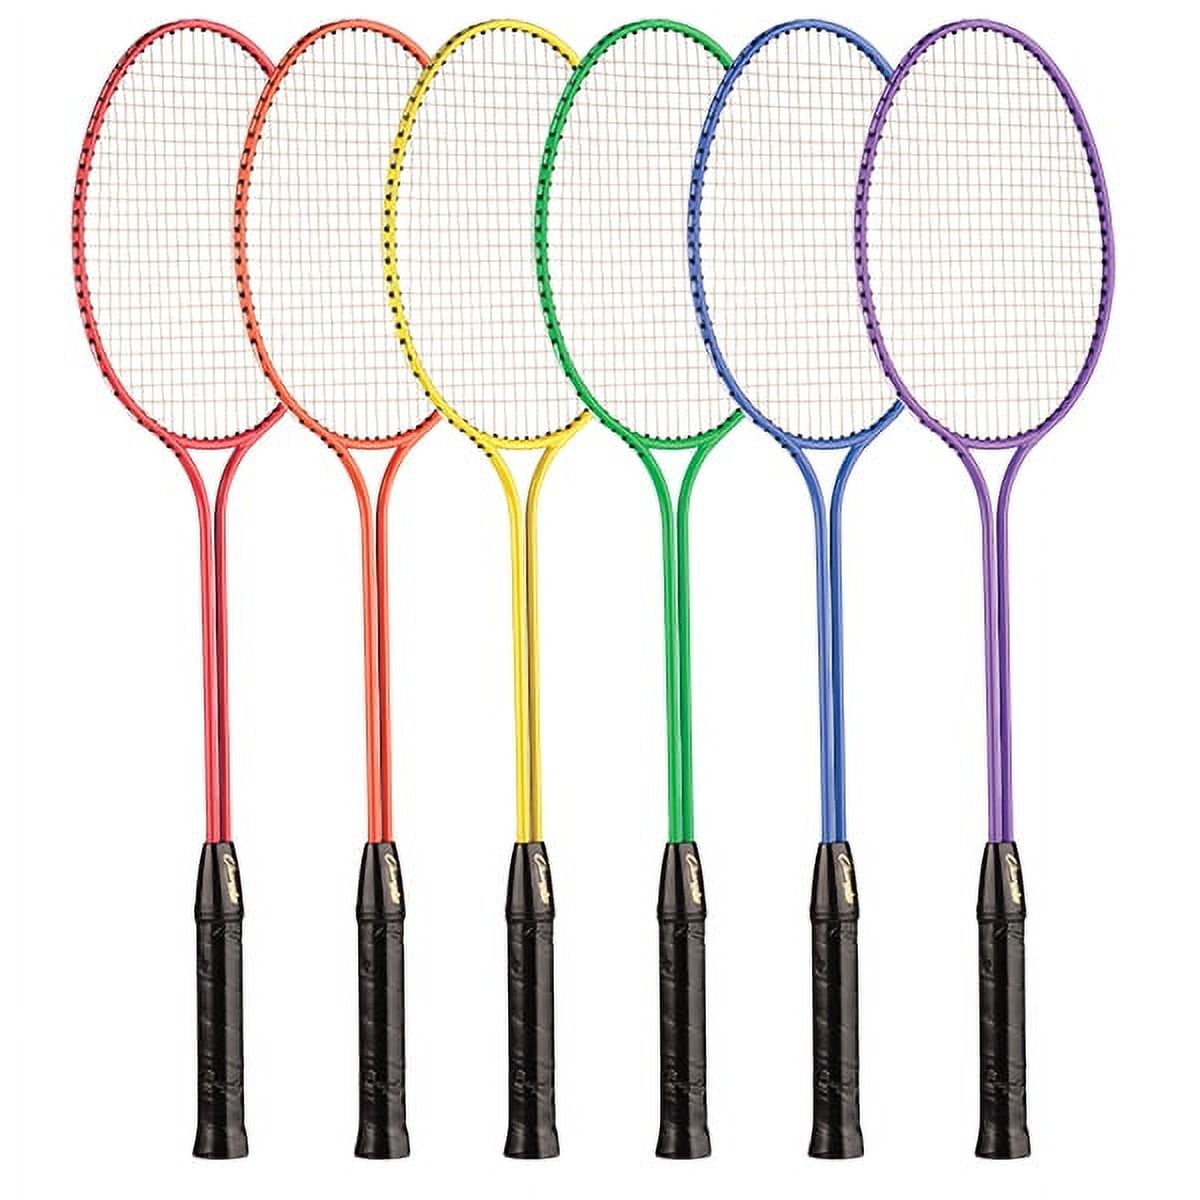 Picture of Champion Sports BR30SET 26 x 8 x 1 in. All Steel Frame Badminton Racket, Assorted Colors